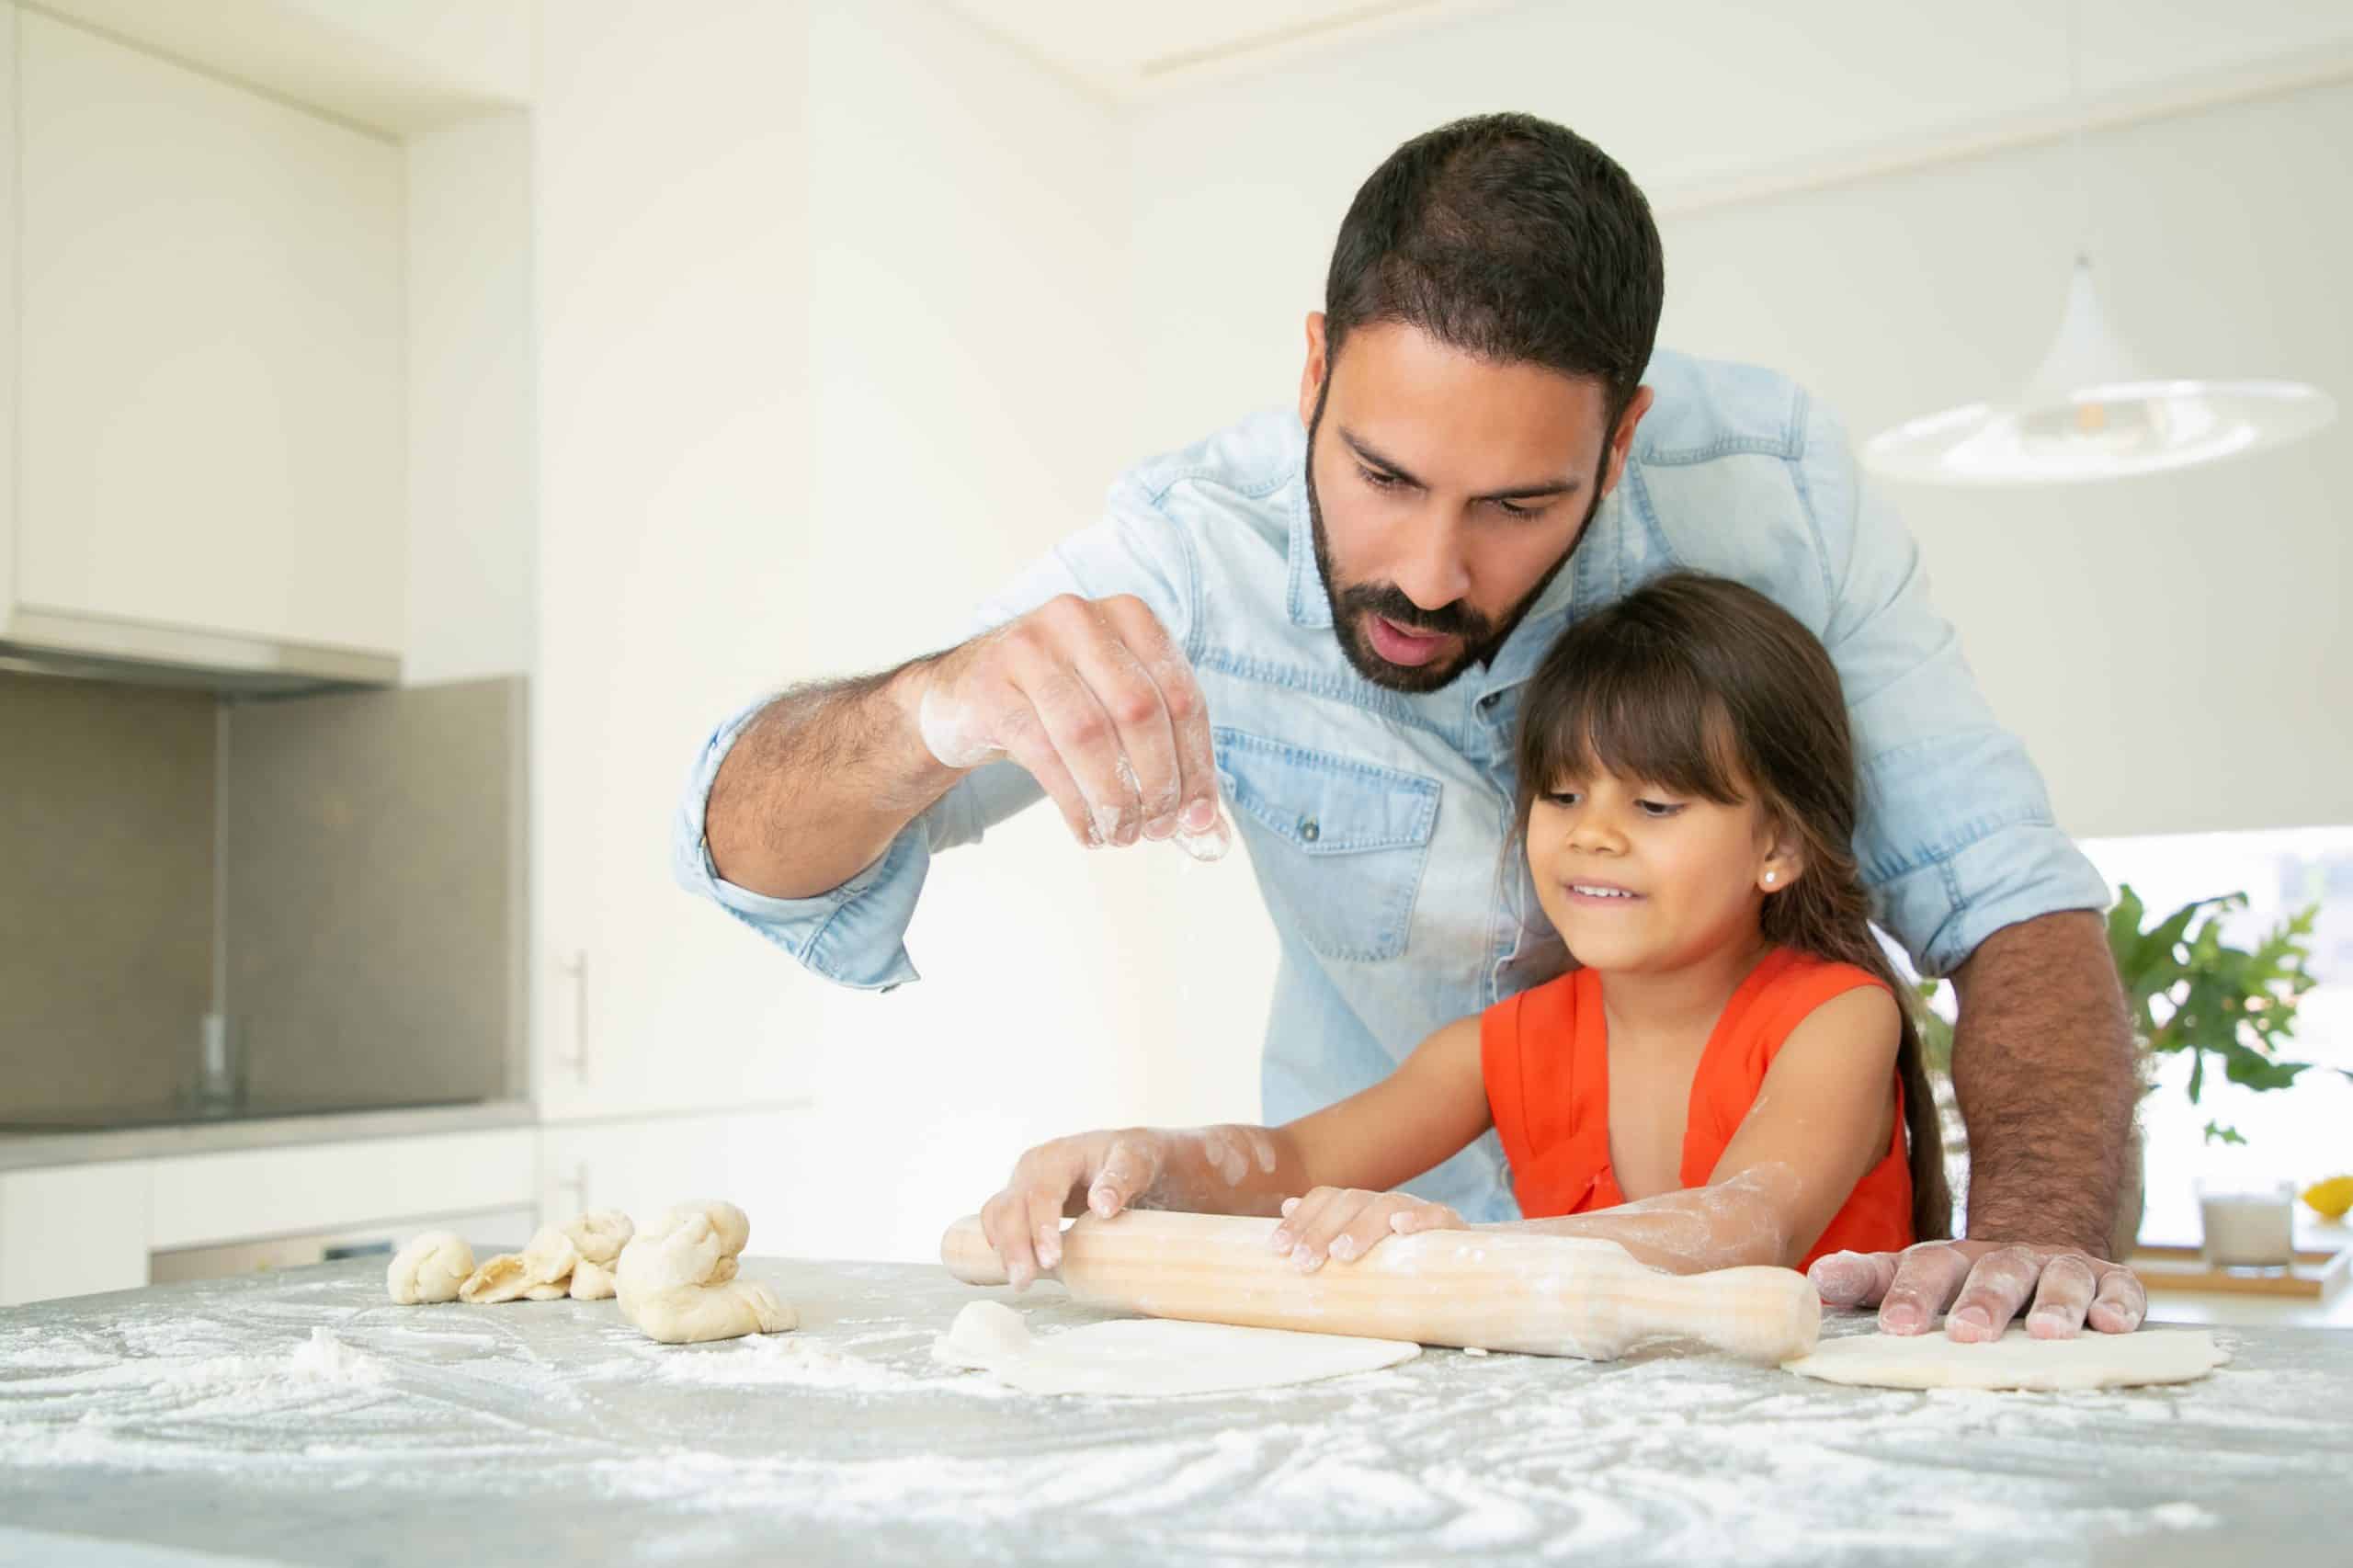 Cheerful girl and her dad kneading and rolling dough